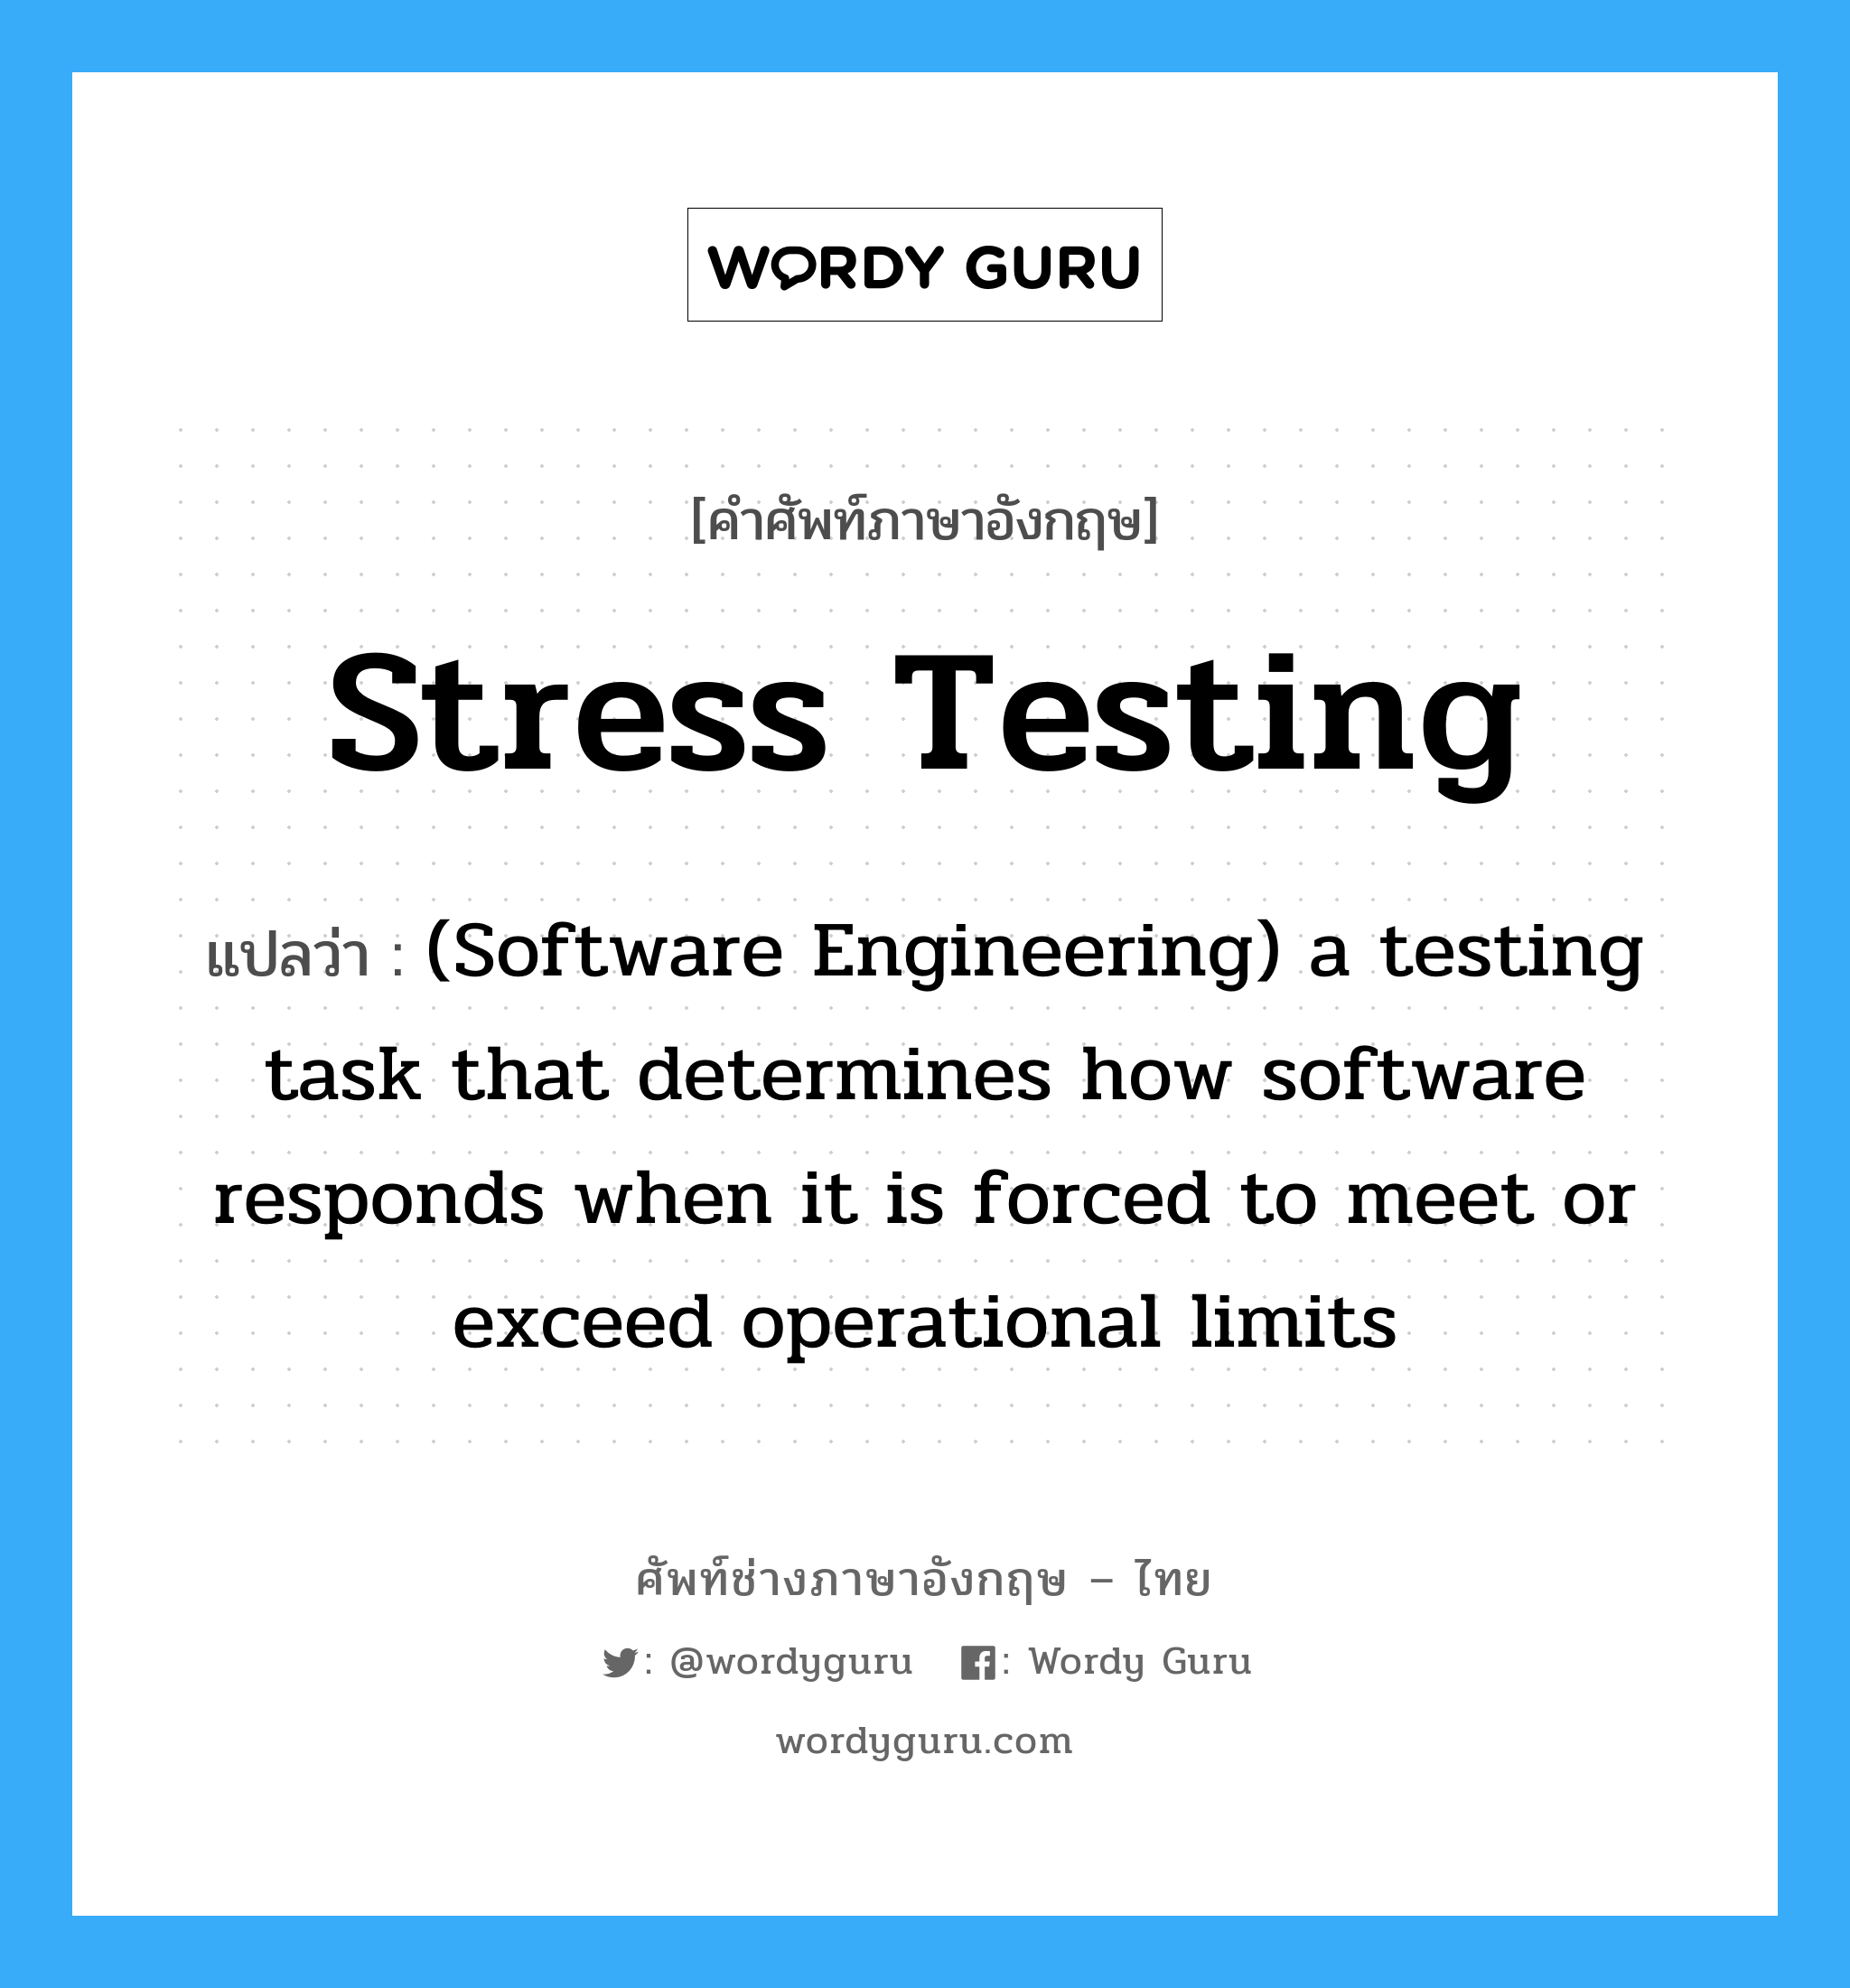 Stress testing แปลว่า?, คำศัพท์ช่างภาษาอังกฤษ - ไทย Stress testing คำศัพท์ภาษาอังกฤษ Stress testing แปลว่า (Software Engineering) a testing task that determines how software responds when it is forced to meet or exceed operational limits